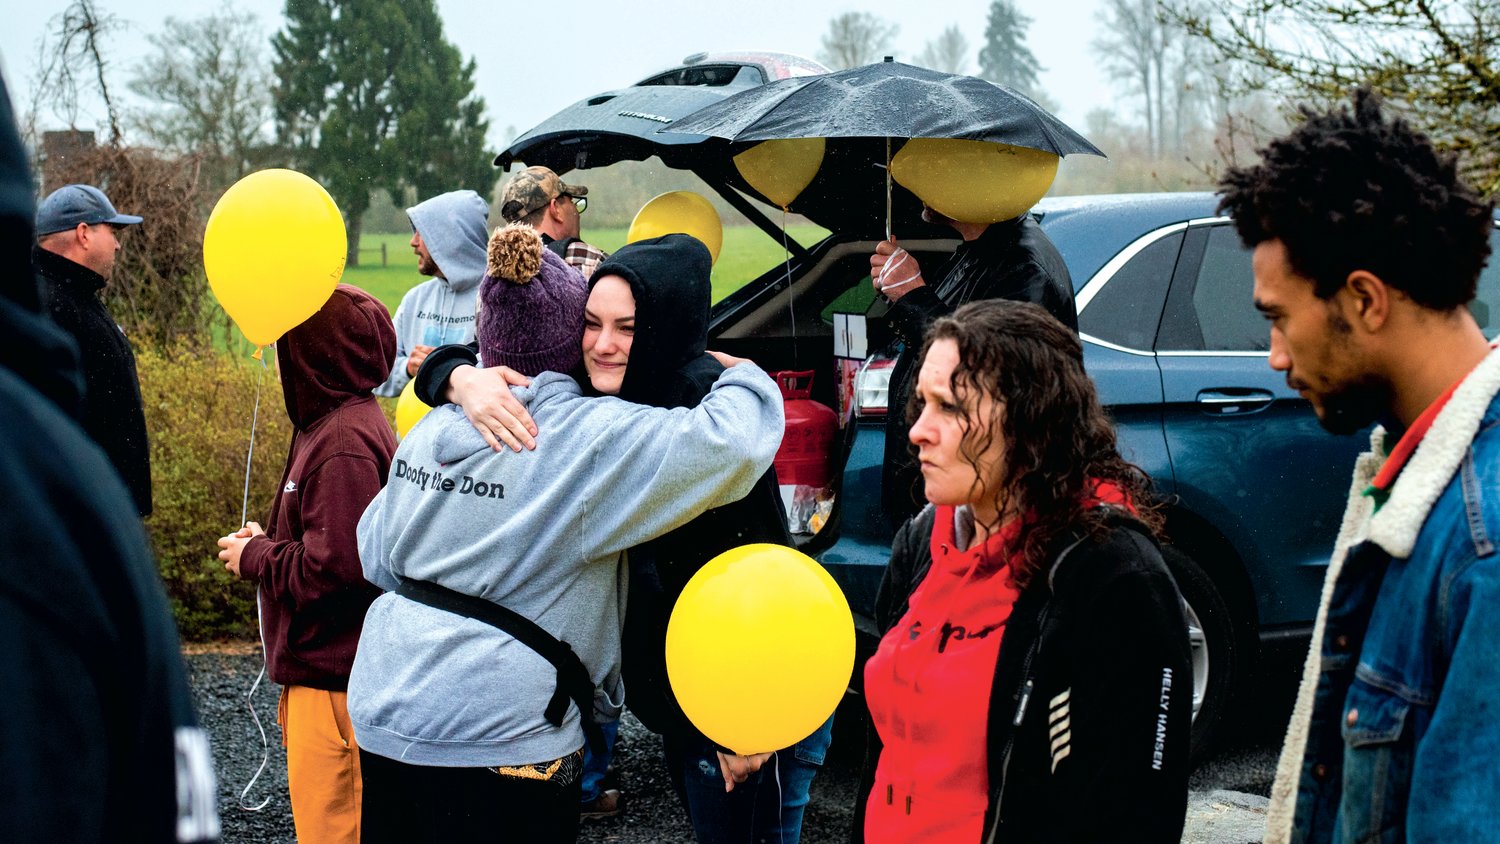 Friends and family mingle during an event marking one year since Zachary Rager lost his life.